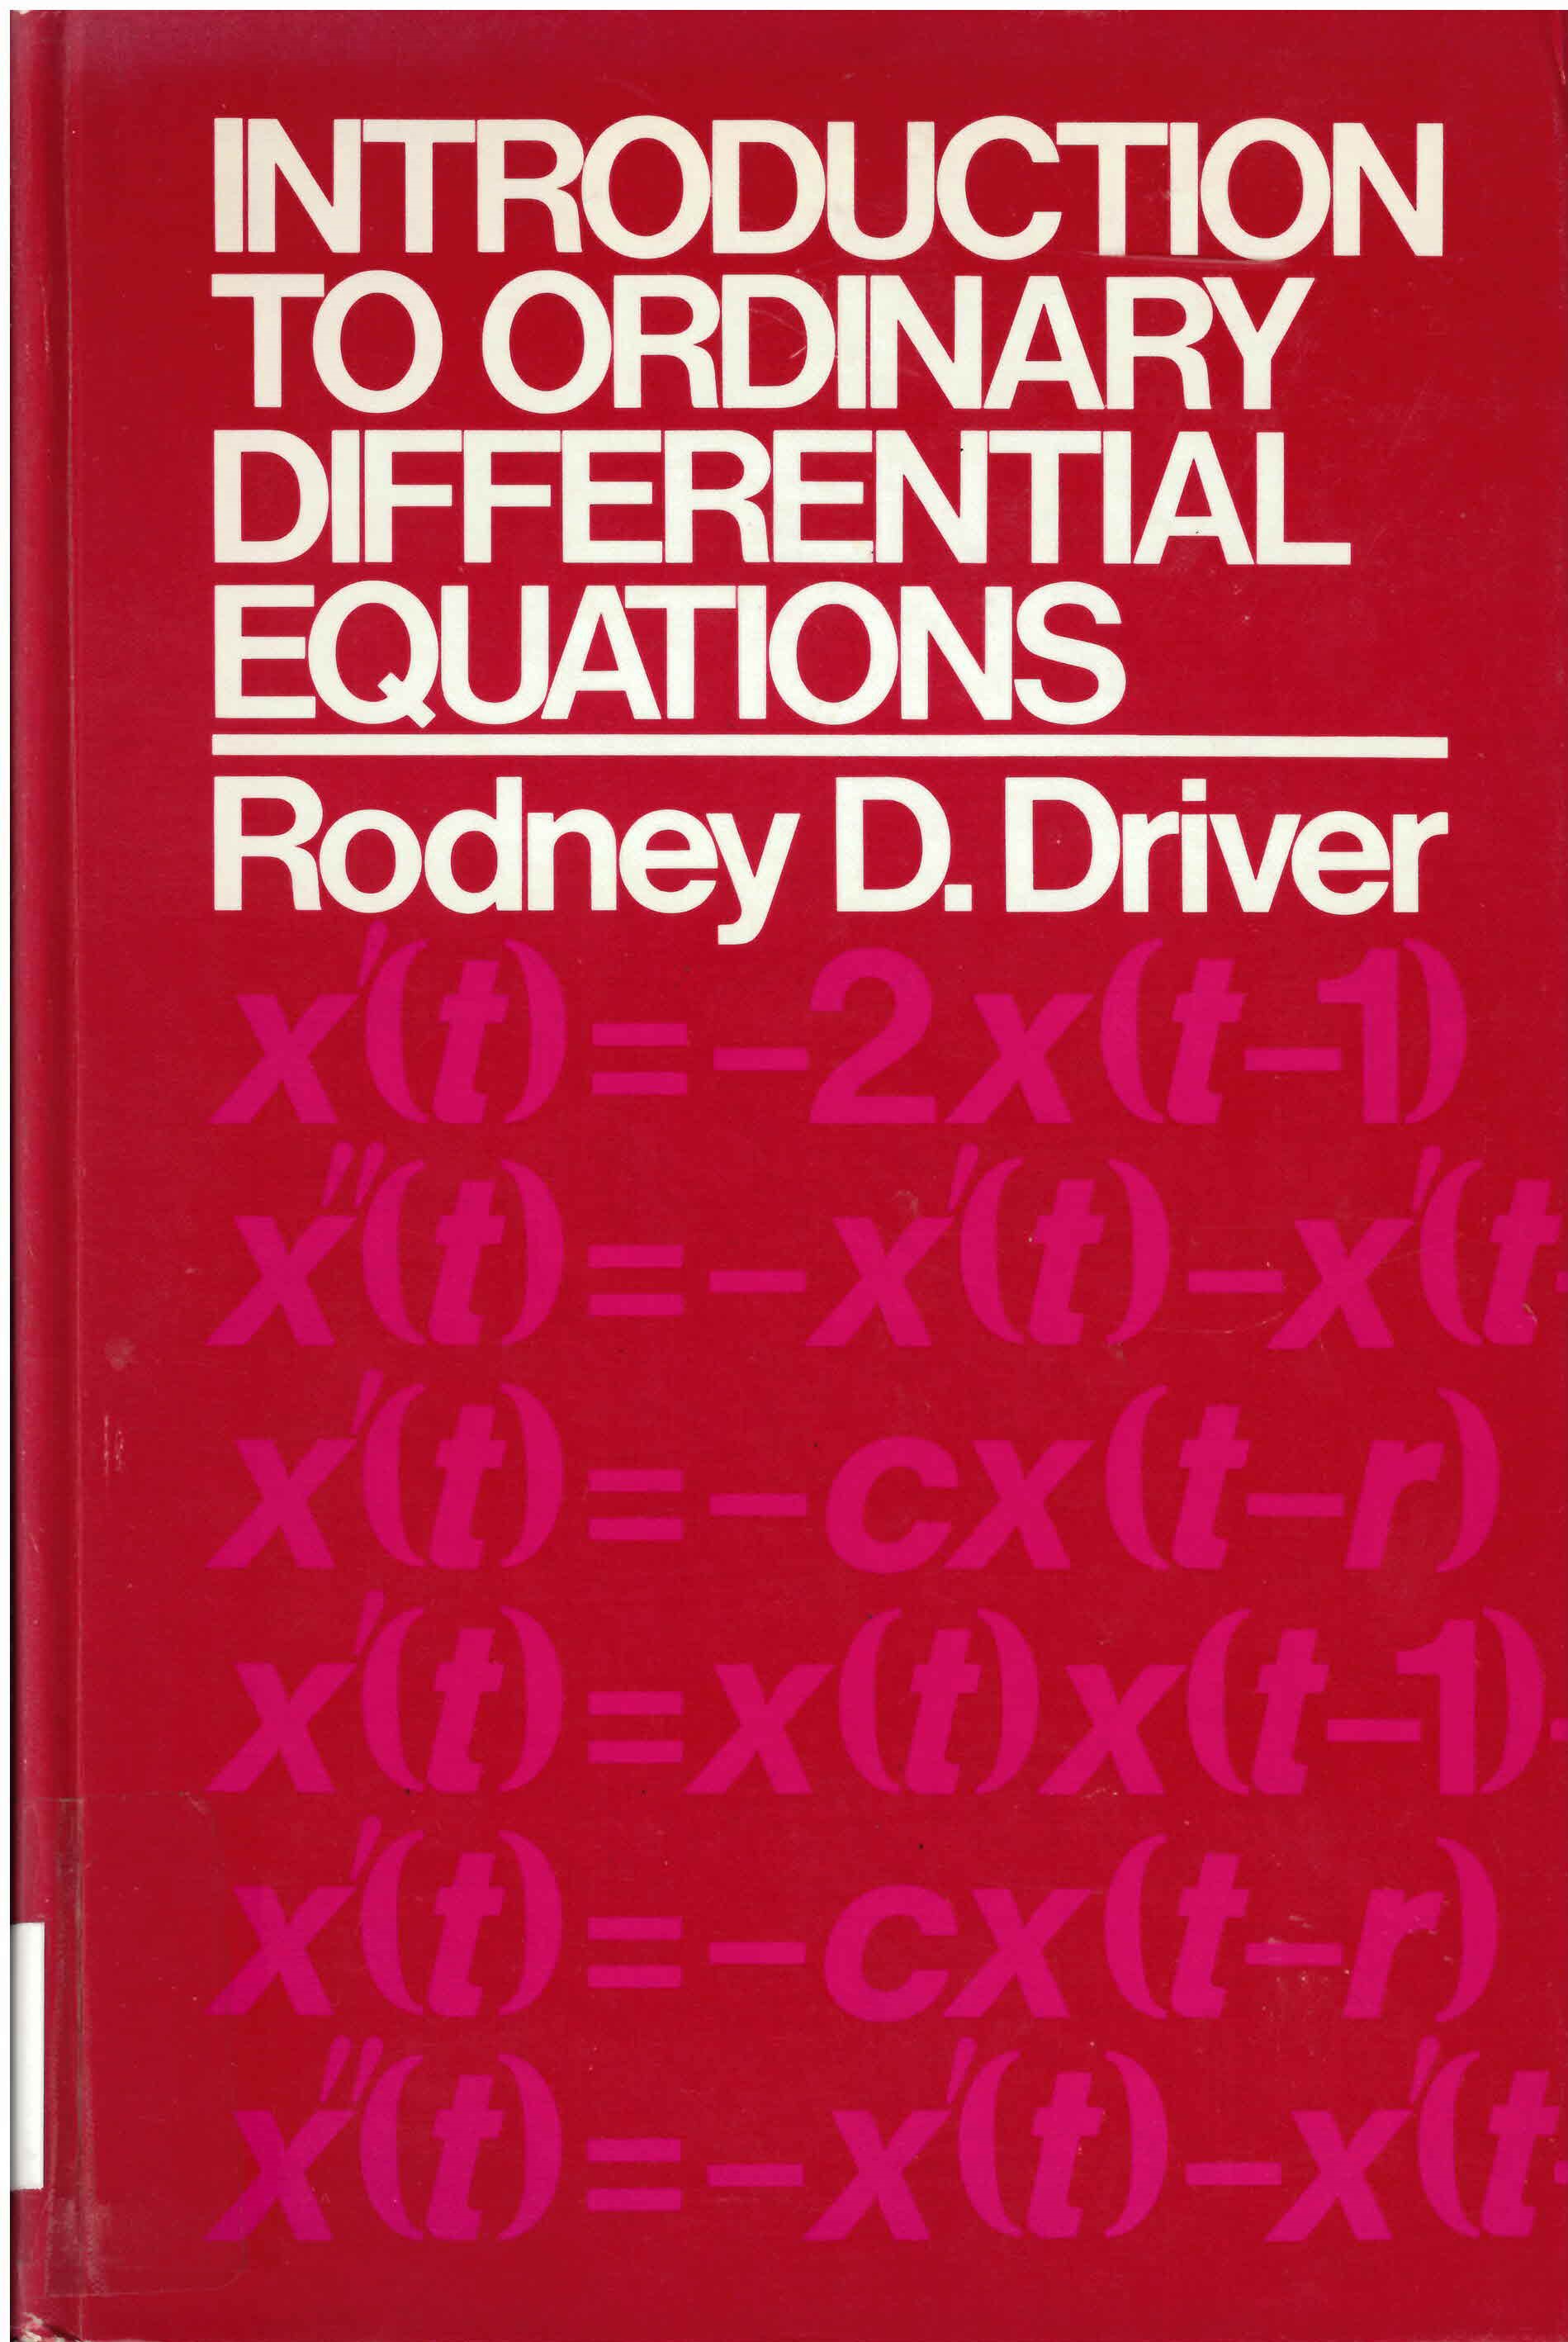 Introduction to ordinary differential equations